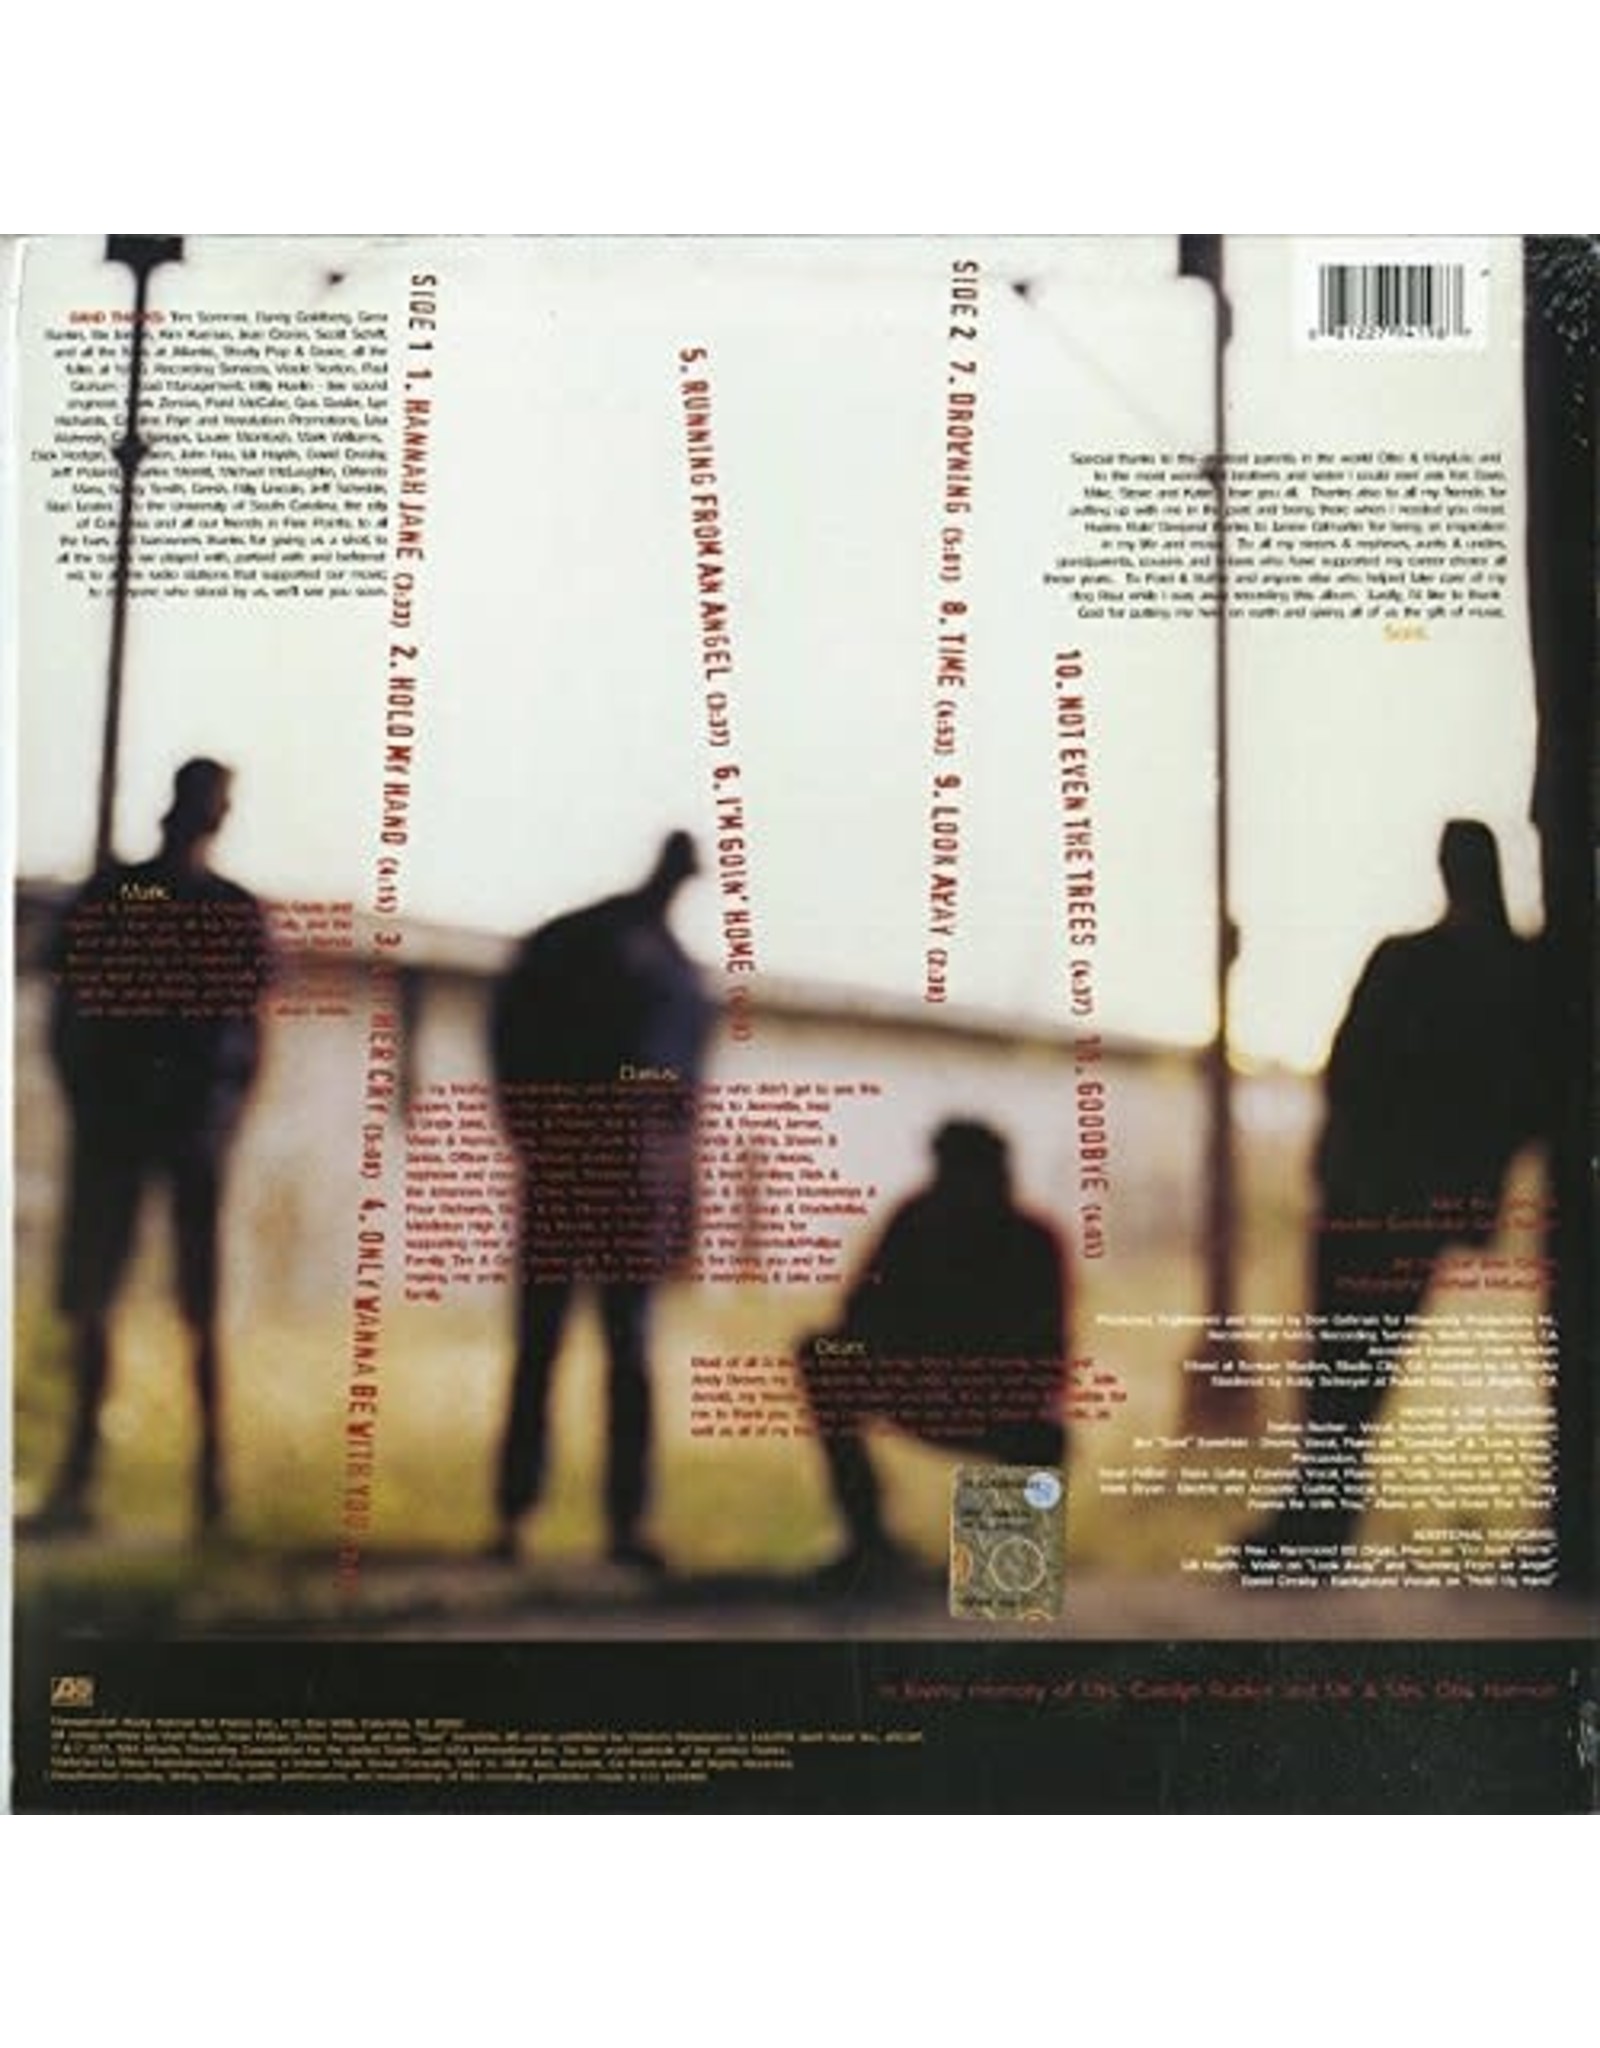 Hootie & The Blowfish - Cracked Rear View (25th Anniversary)